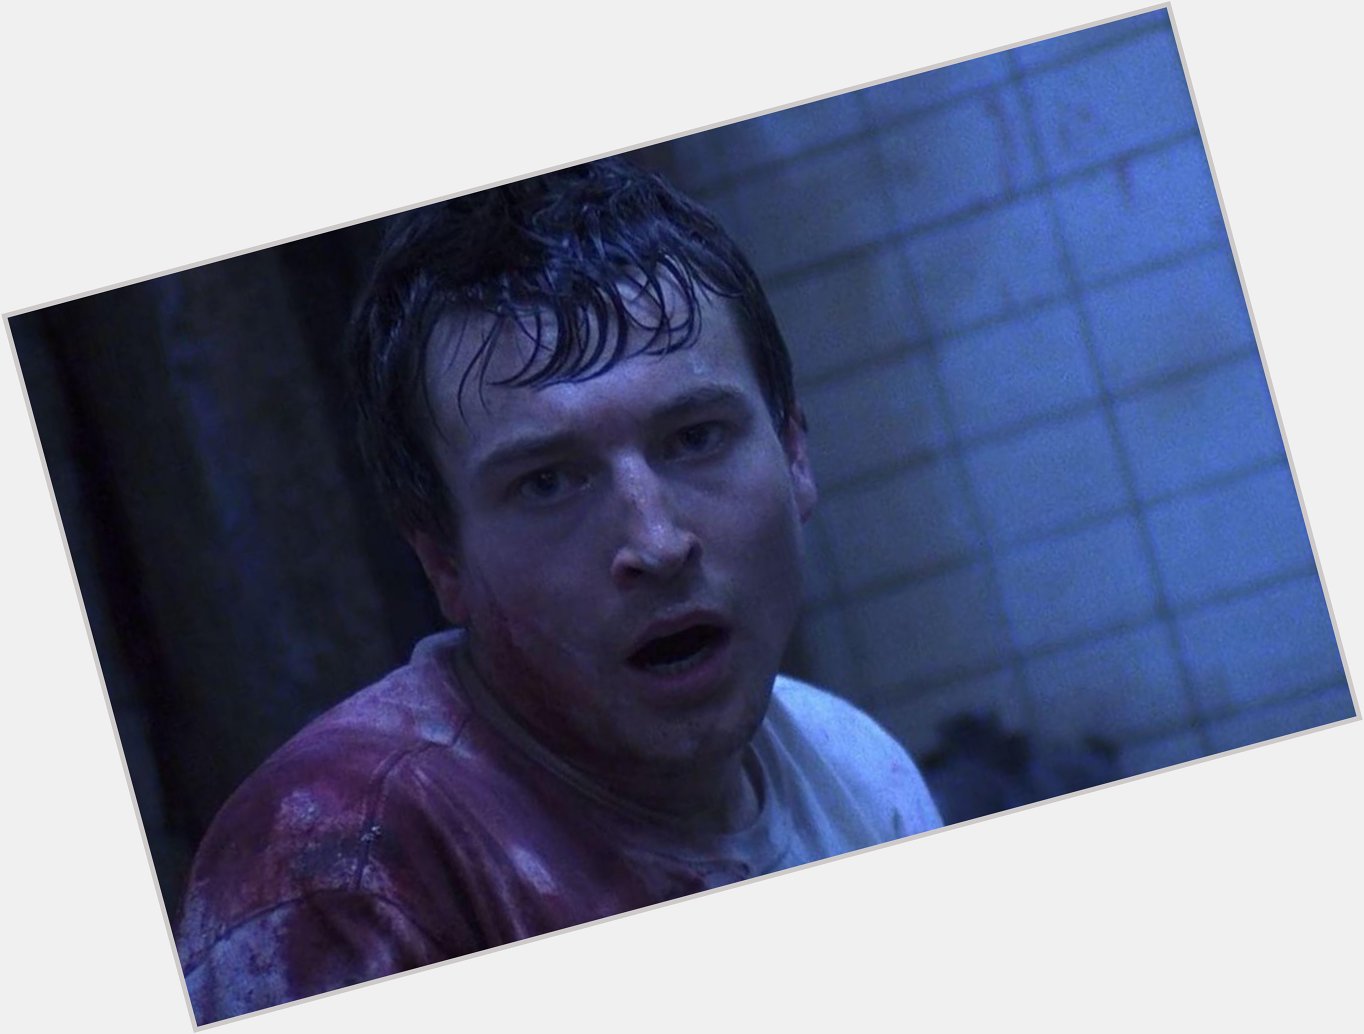     A Happy Birthday to Leigh Whannell     